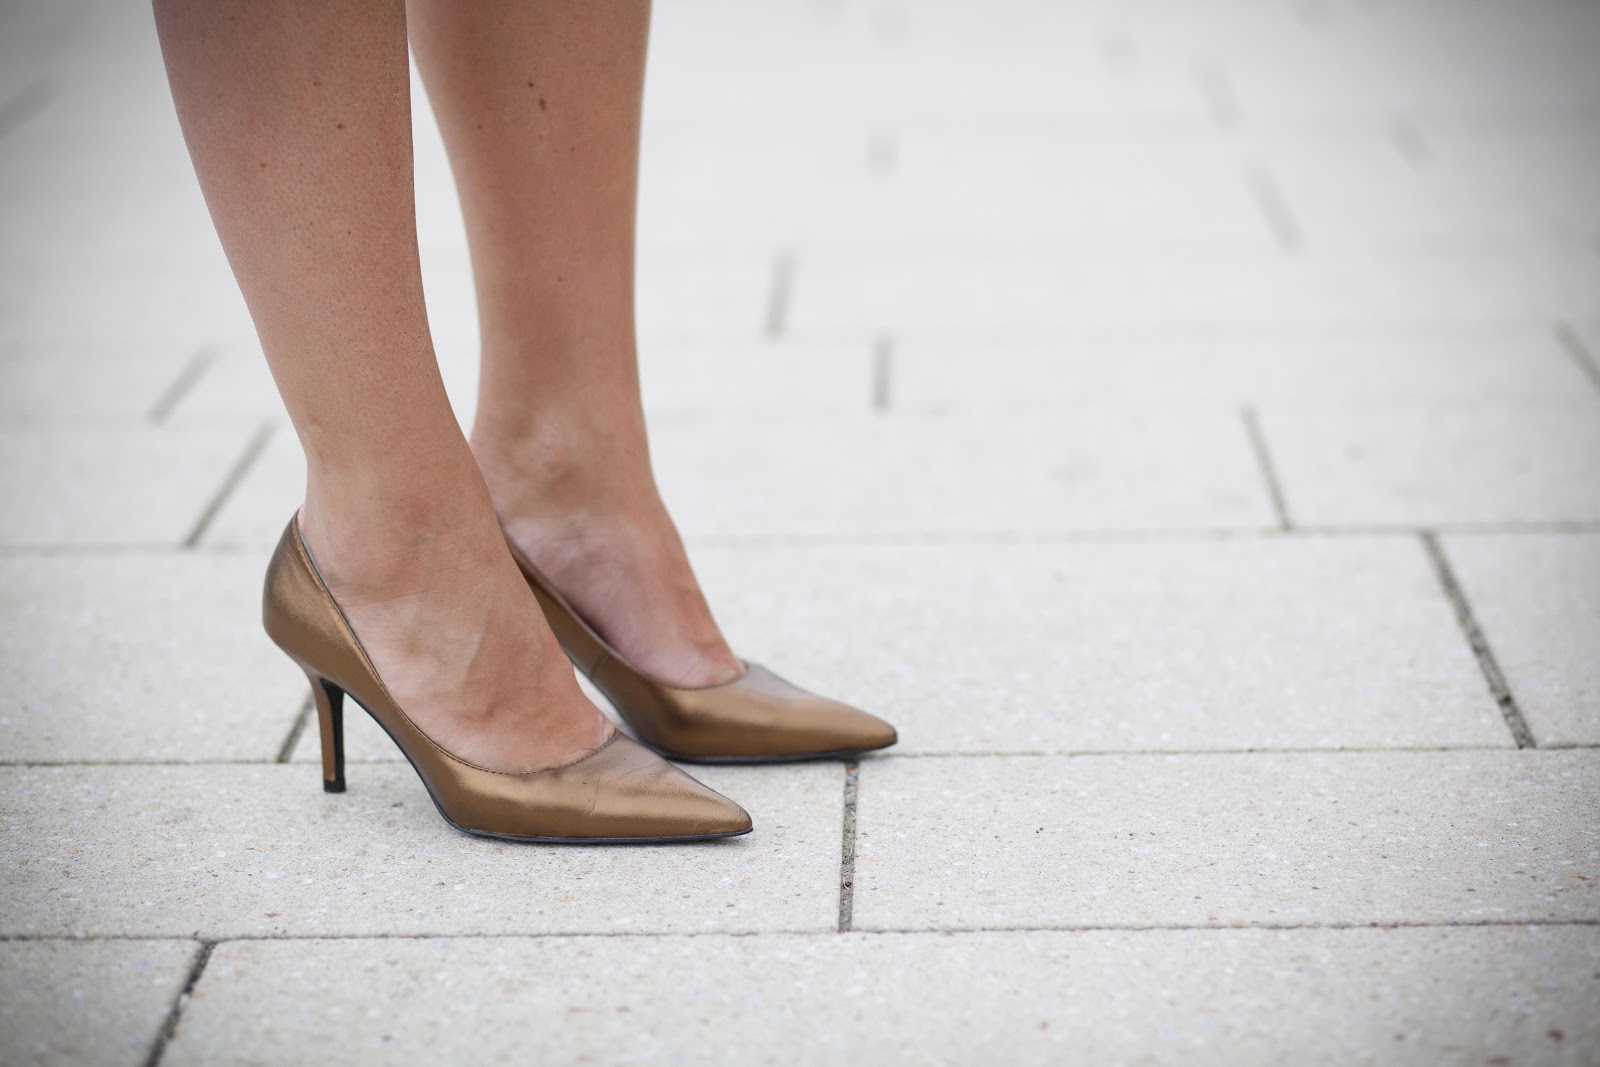 OUTFITPOST: THE POINTED HEELS | Fashionista Chloë